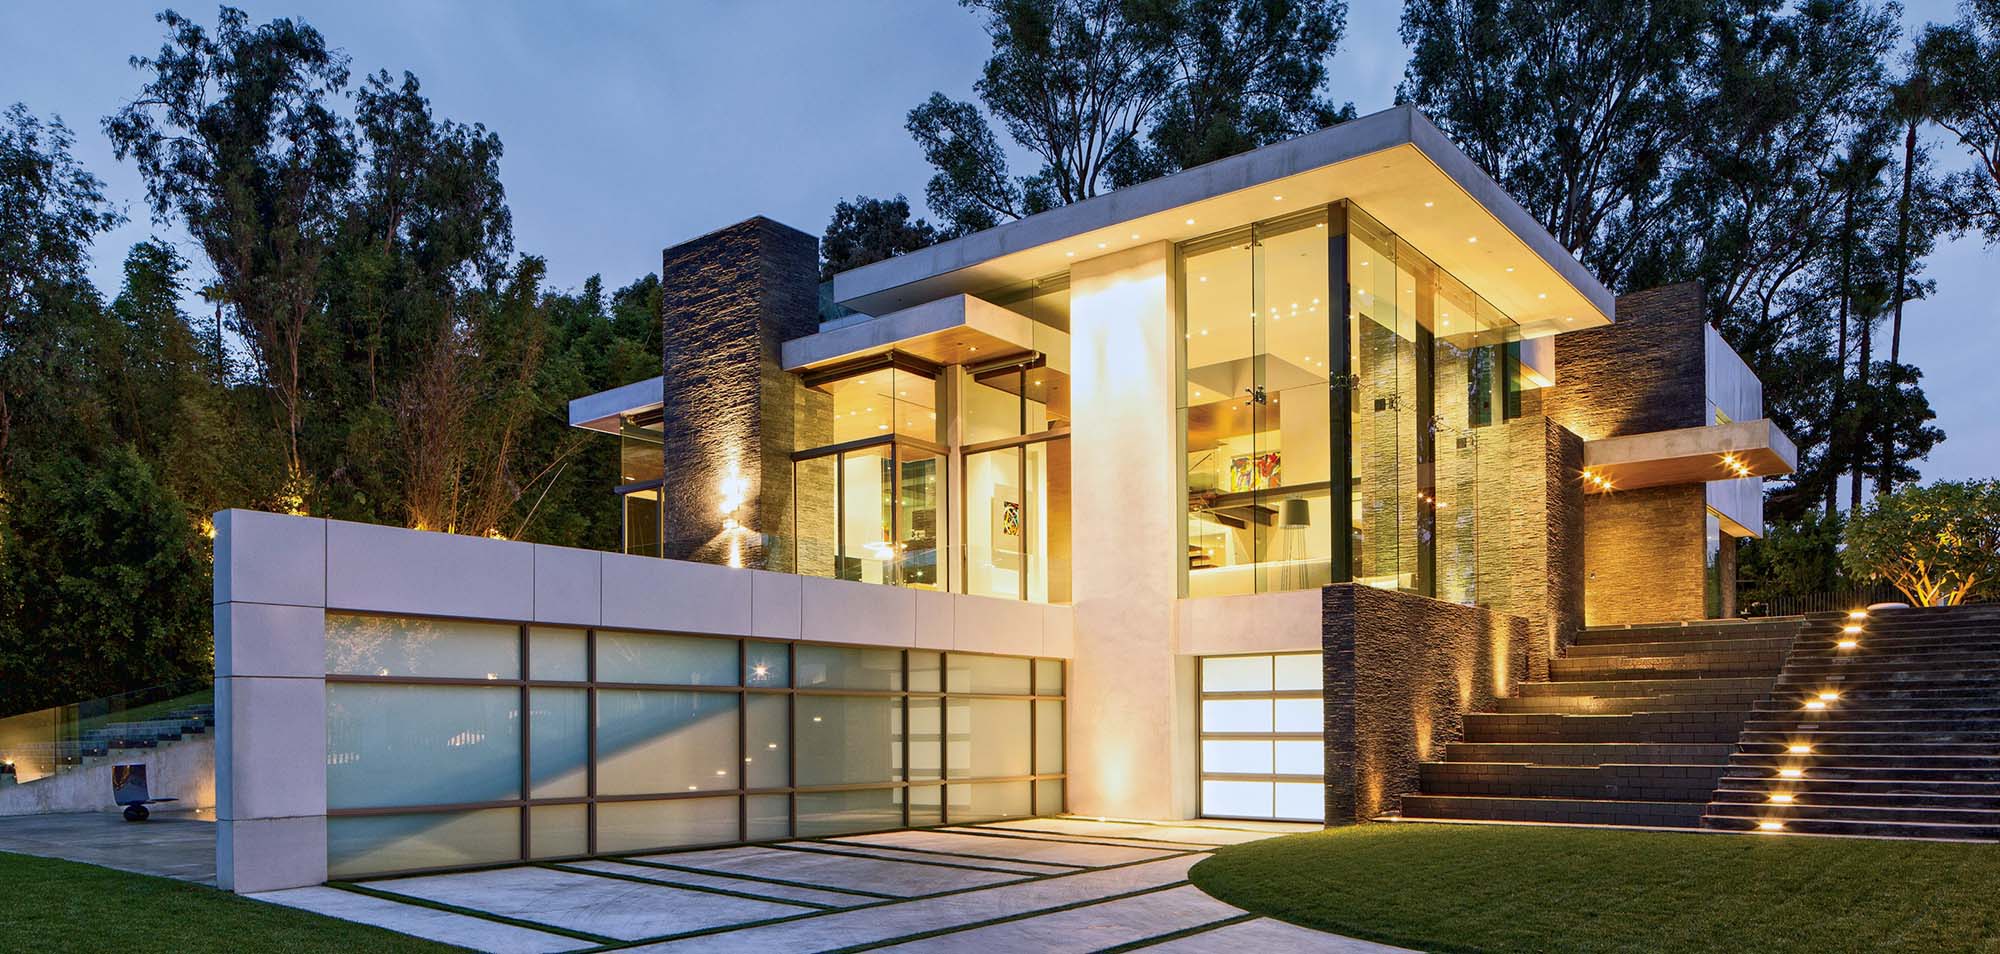 Modern home with full glass walls. Stone and stucco. - Gambrick